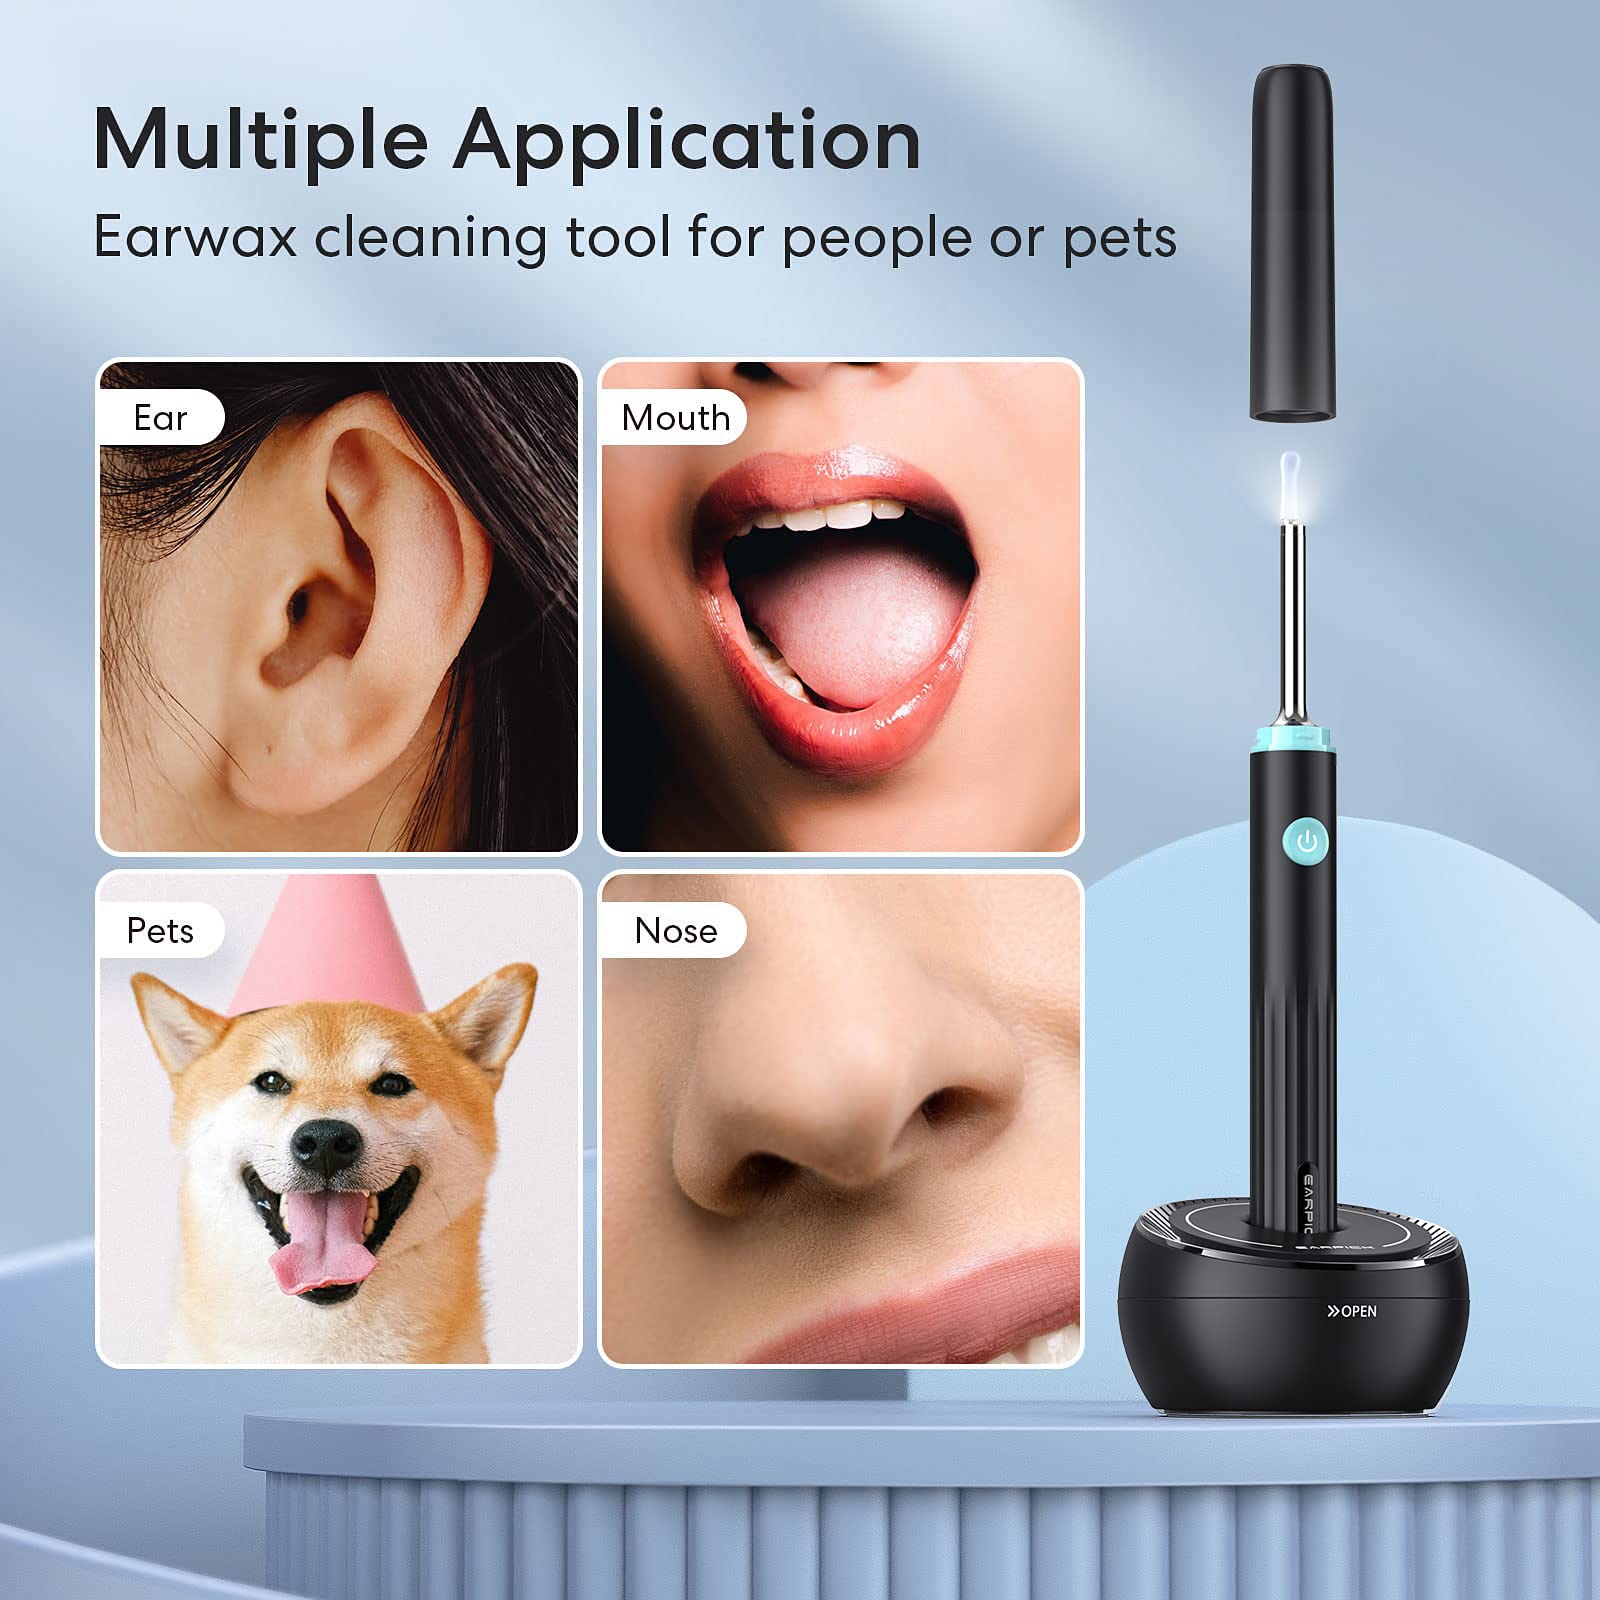 Ear Wax Removal, Ear Cleaner with Camera, Ear Camera with Charging Cable, Ear Wax Removal Tool with 1080P HD, Wireless Otoscope with Light, Ear Wax Removal Kit for iPhone, iPad, Android Phones (Black)